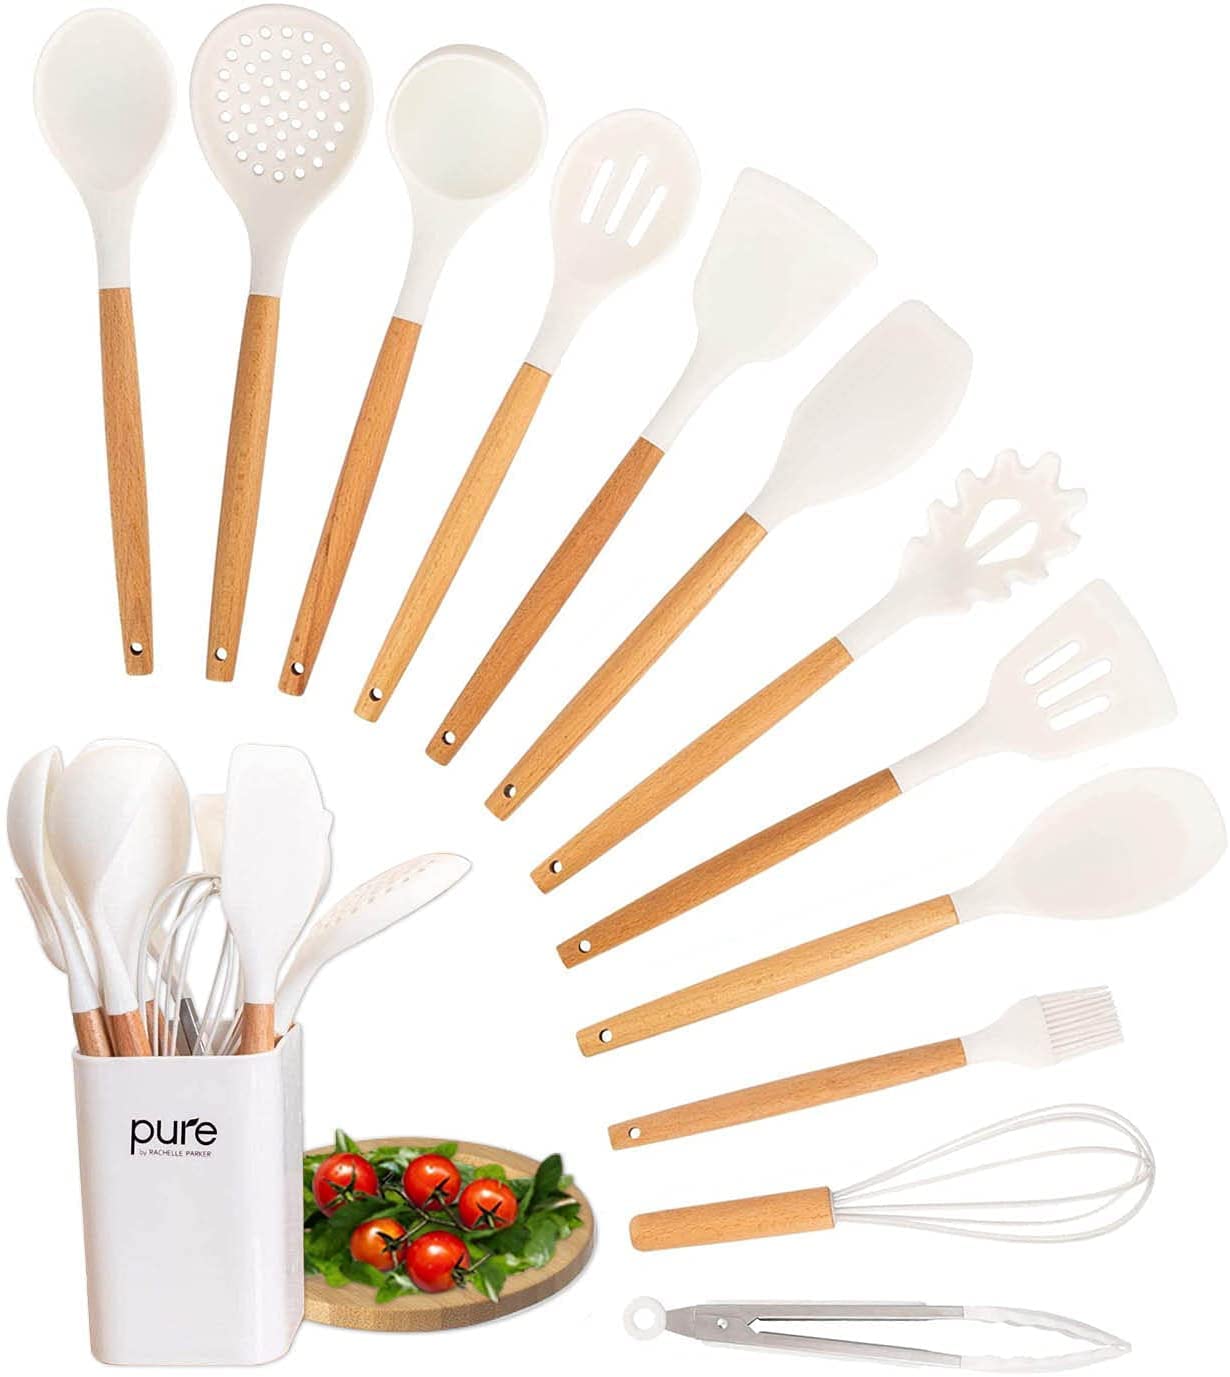 VIVAYO Silicone Cooking Utensil Kitchen Utensils Set, 12 Pieces Silicone Kitchen Utensil Wooden Handles, Kitchen Spatula Sets with Holder Spoon